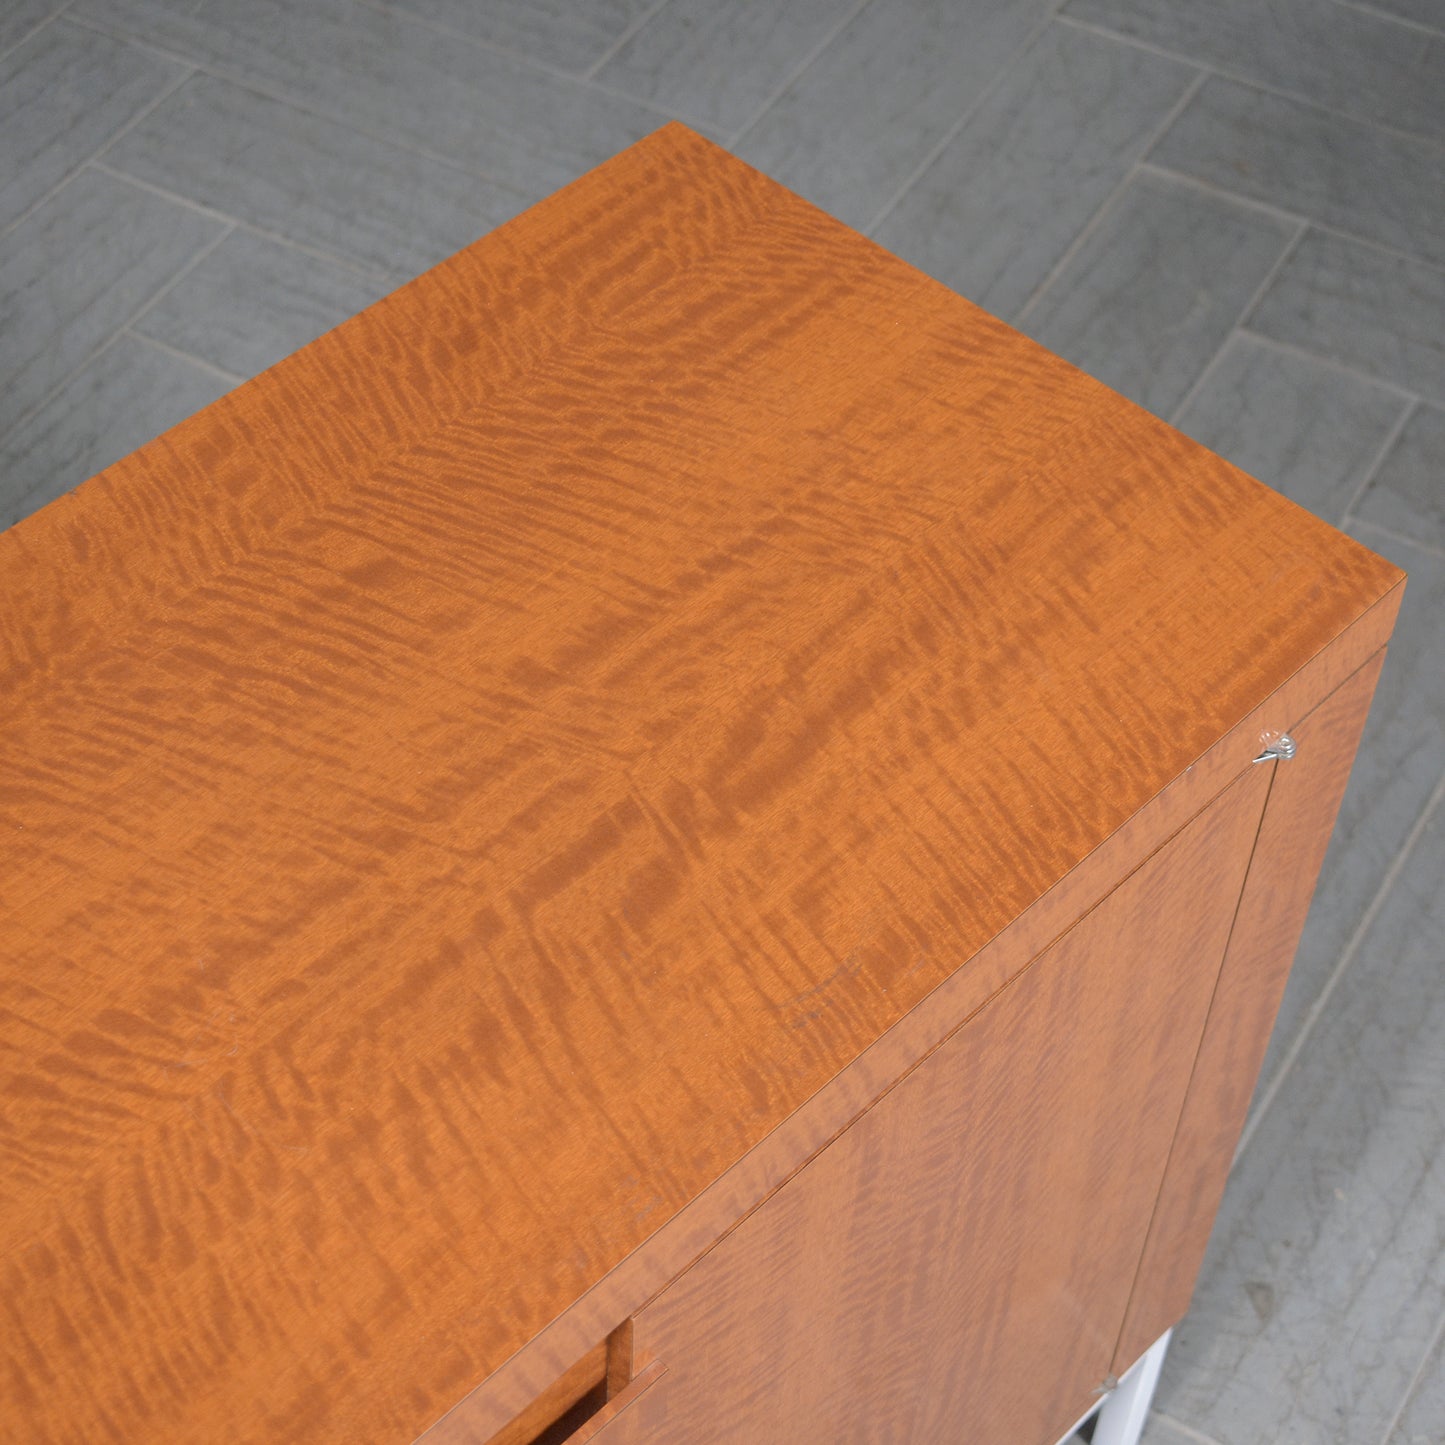 Modern Executive Tiger Oak Credenza: Sophisticated Design Meets Functionality